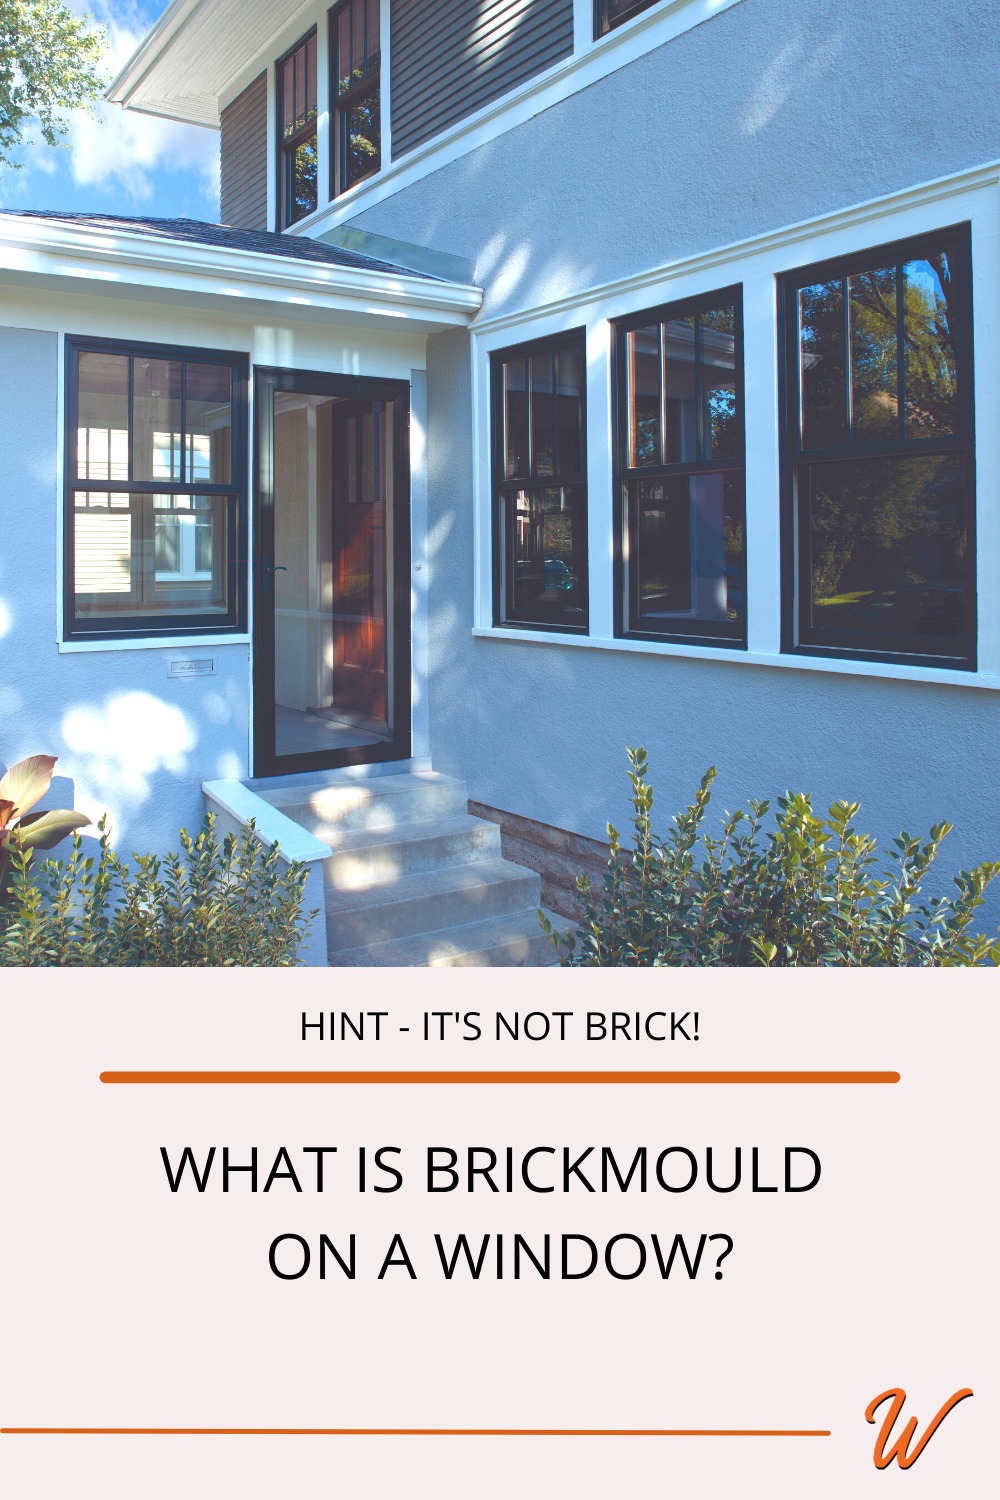 blue stucco home with black windows and white brickmould captioned with 'What is brickmould on a window? Hint - it's not brick!"